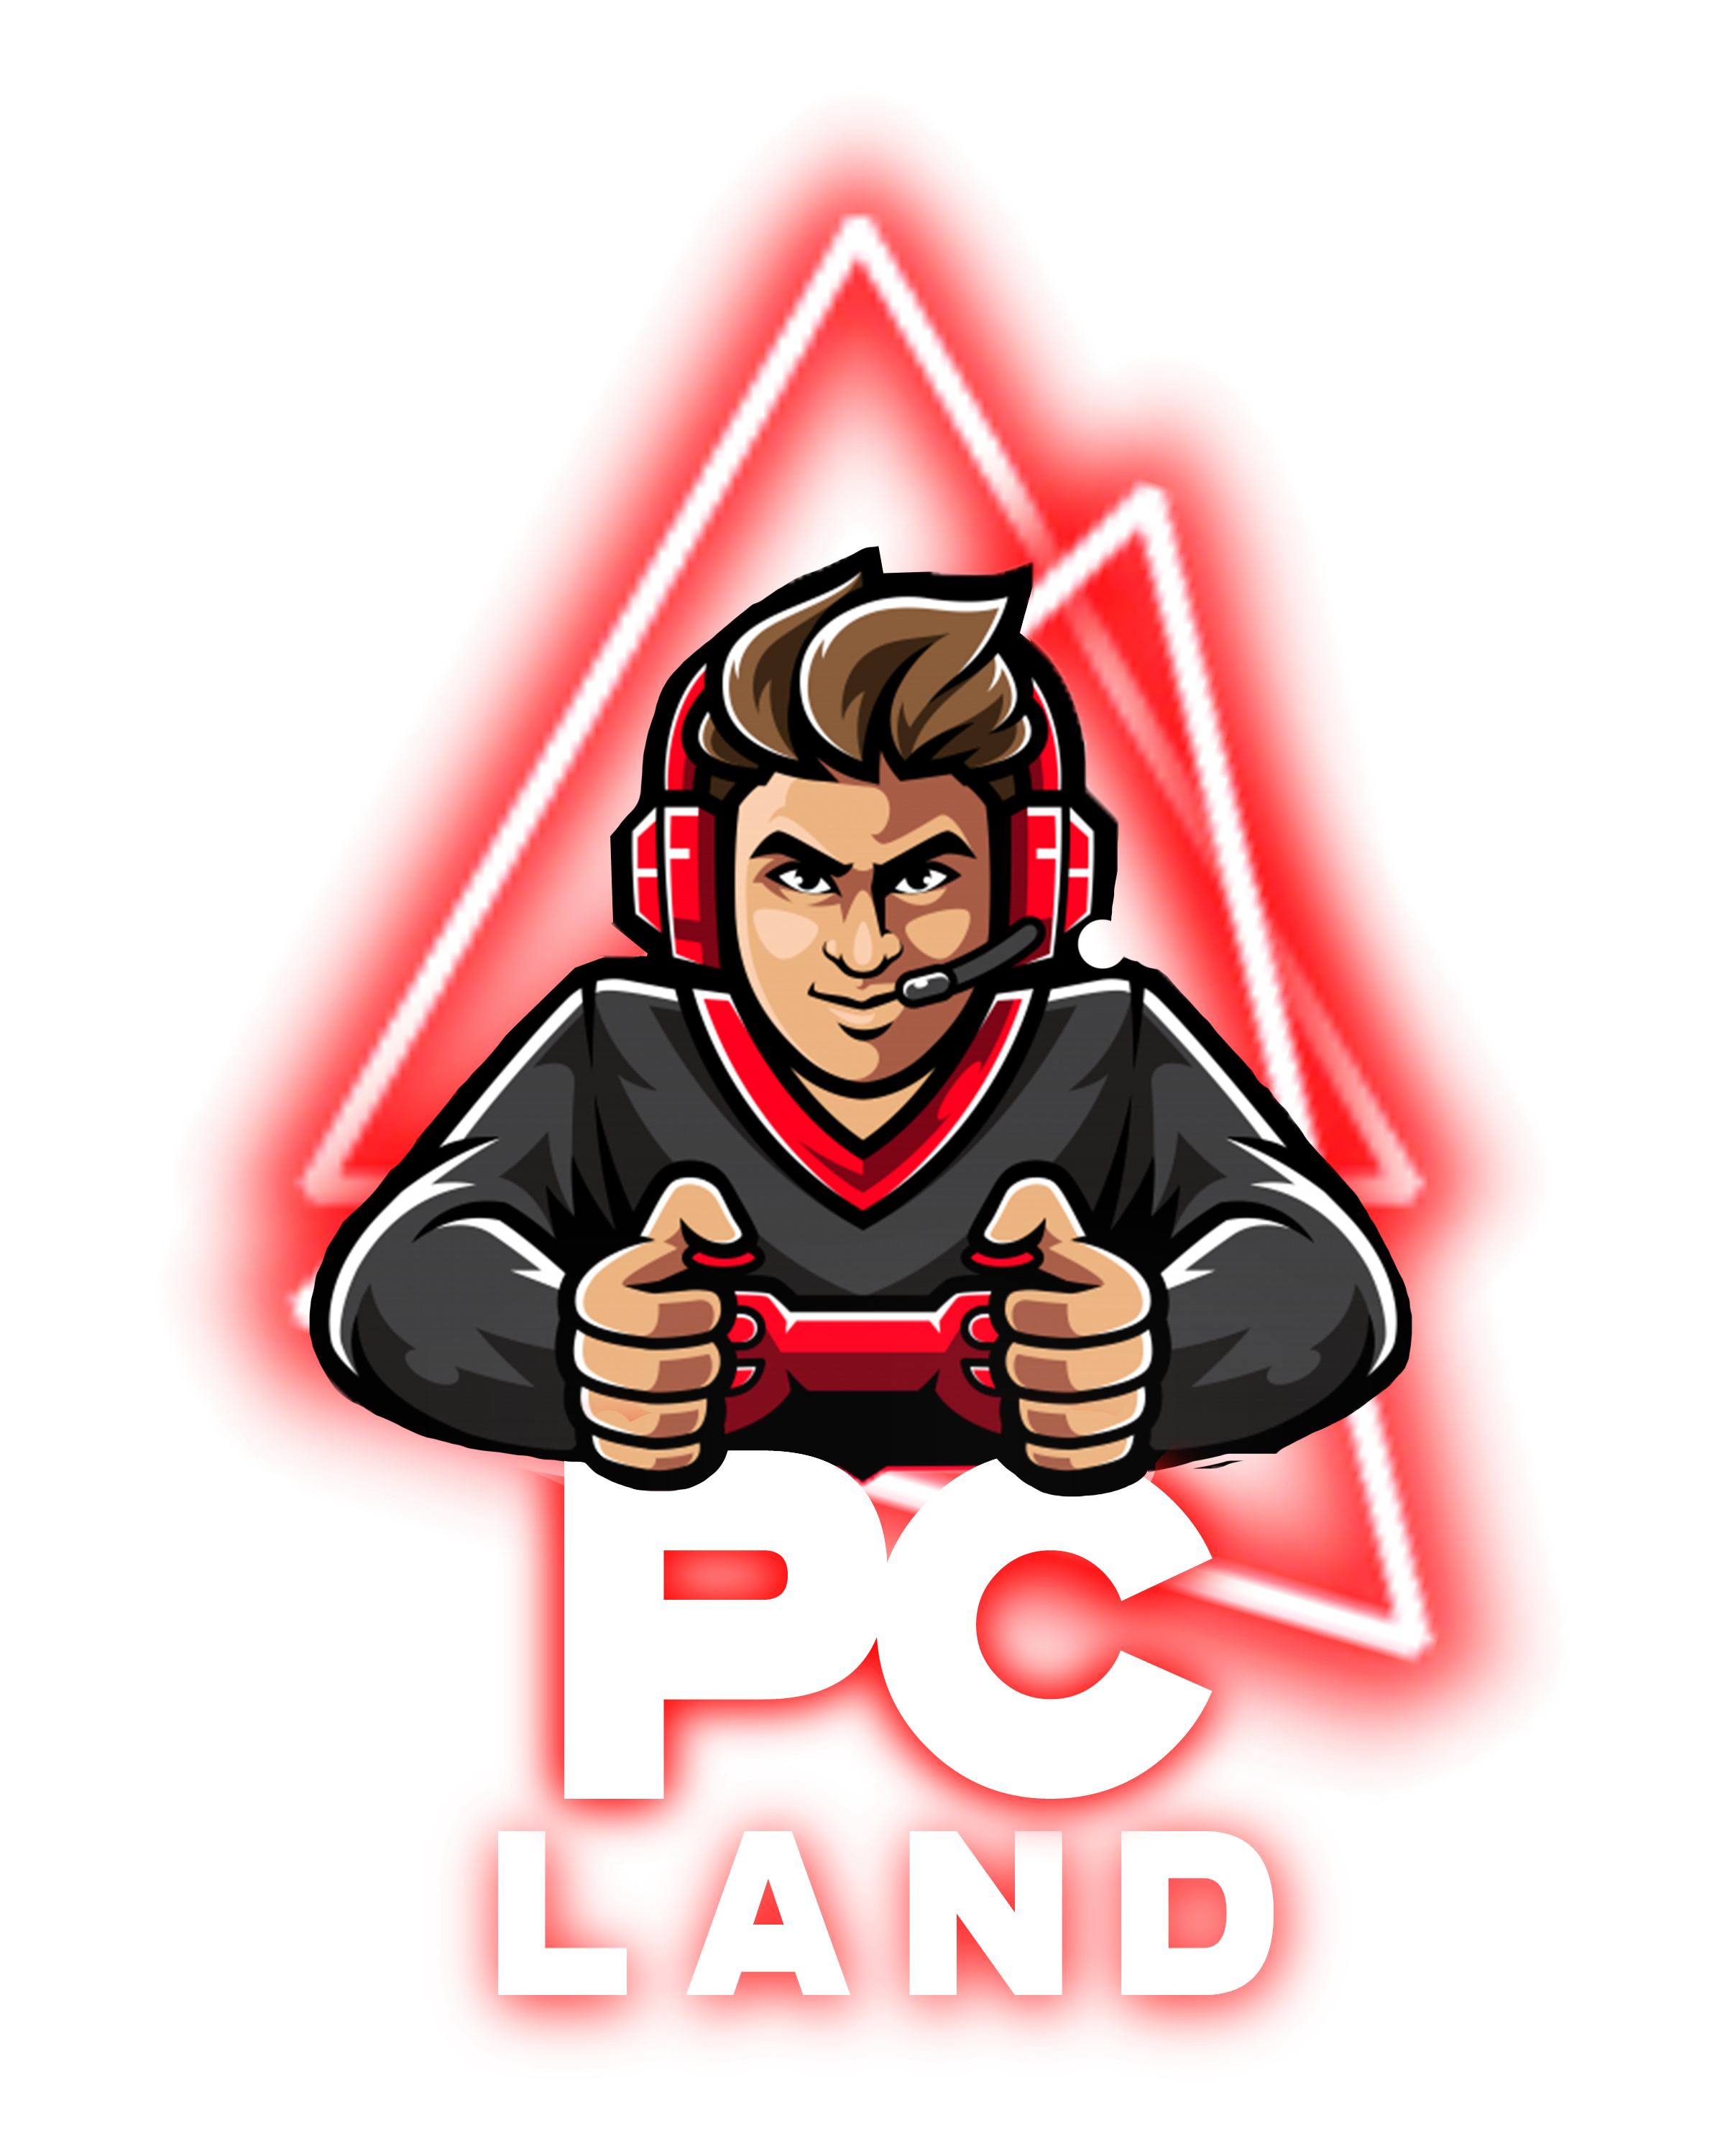 PCLAND